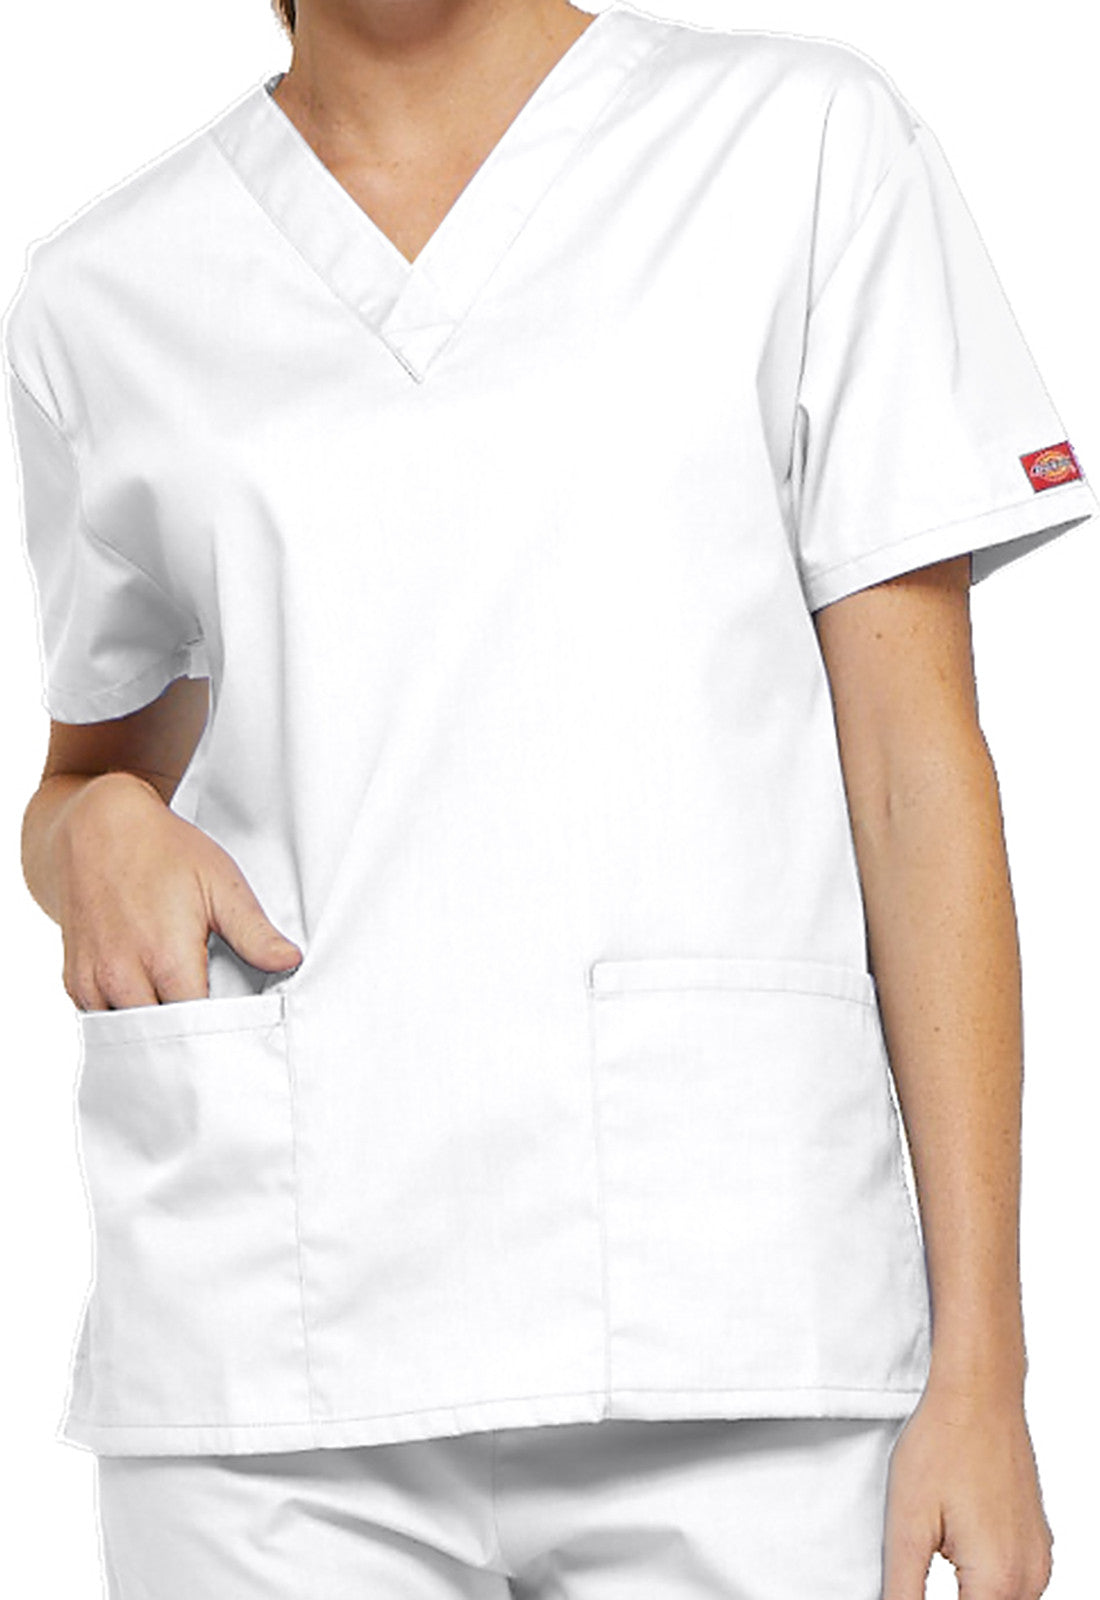 Montreuil - Tunique col V - Femme - Dickies Dickies